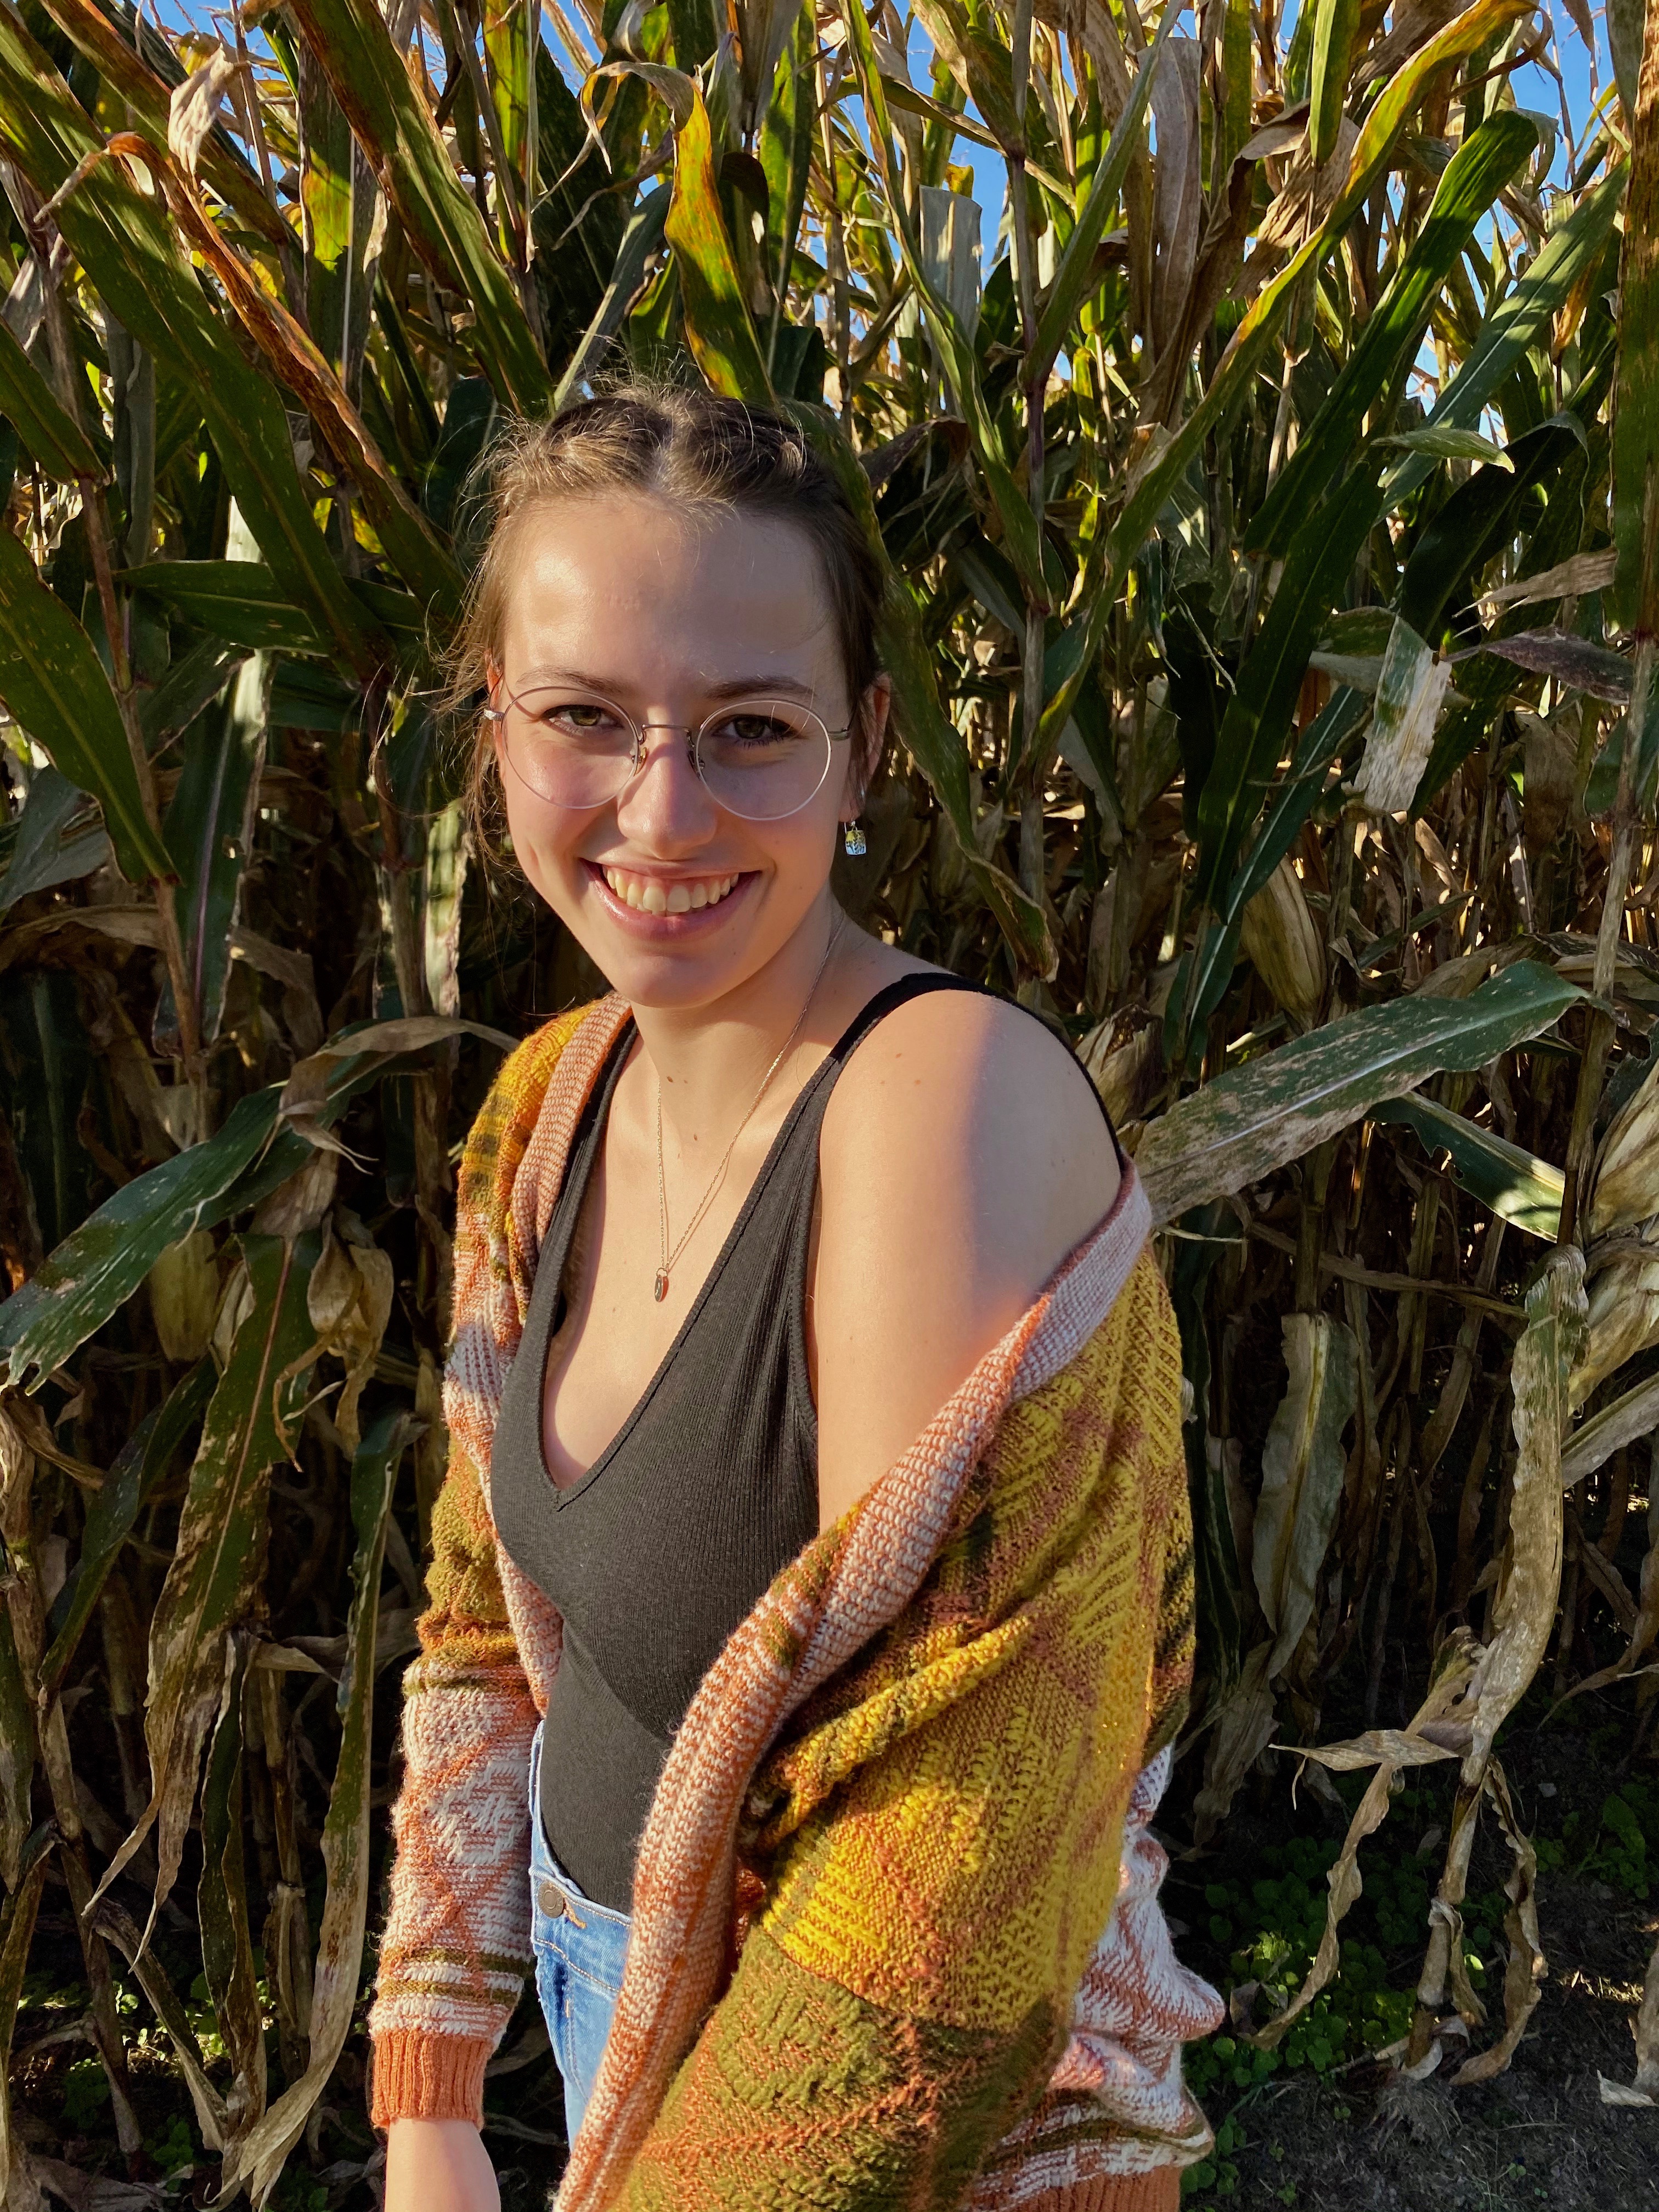 Sylvie, wearing a black shirt and multicolored cardigan, smiling with a field of corn behind her. 